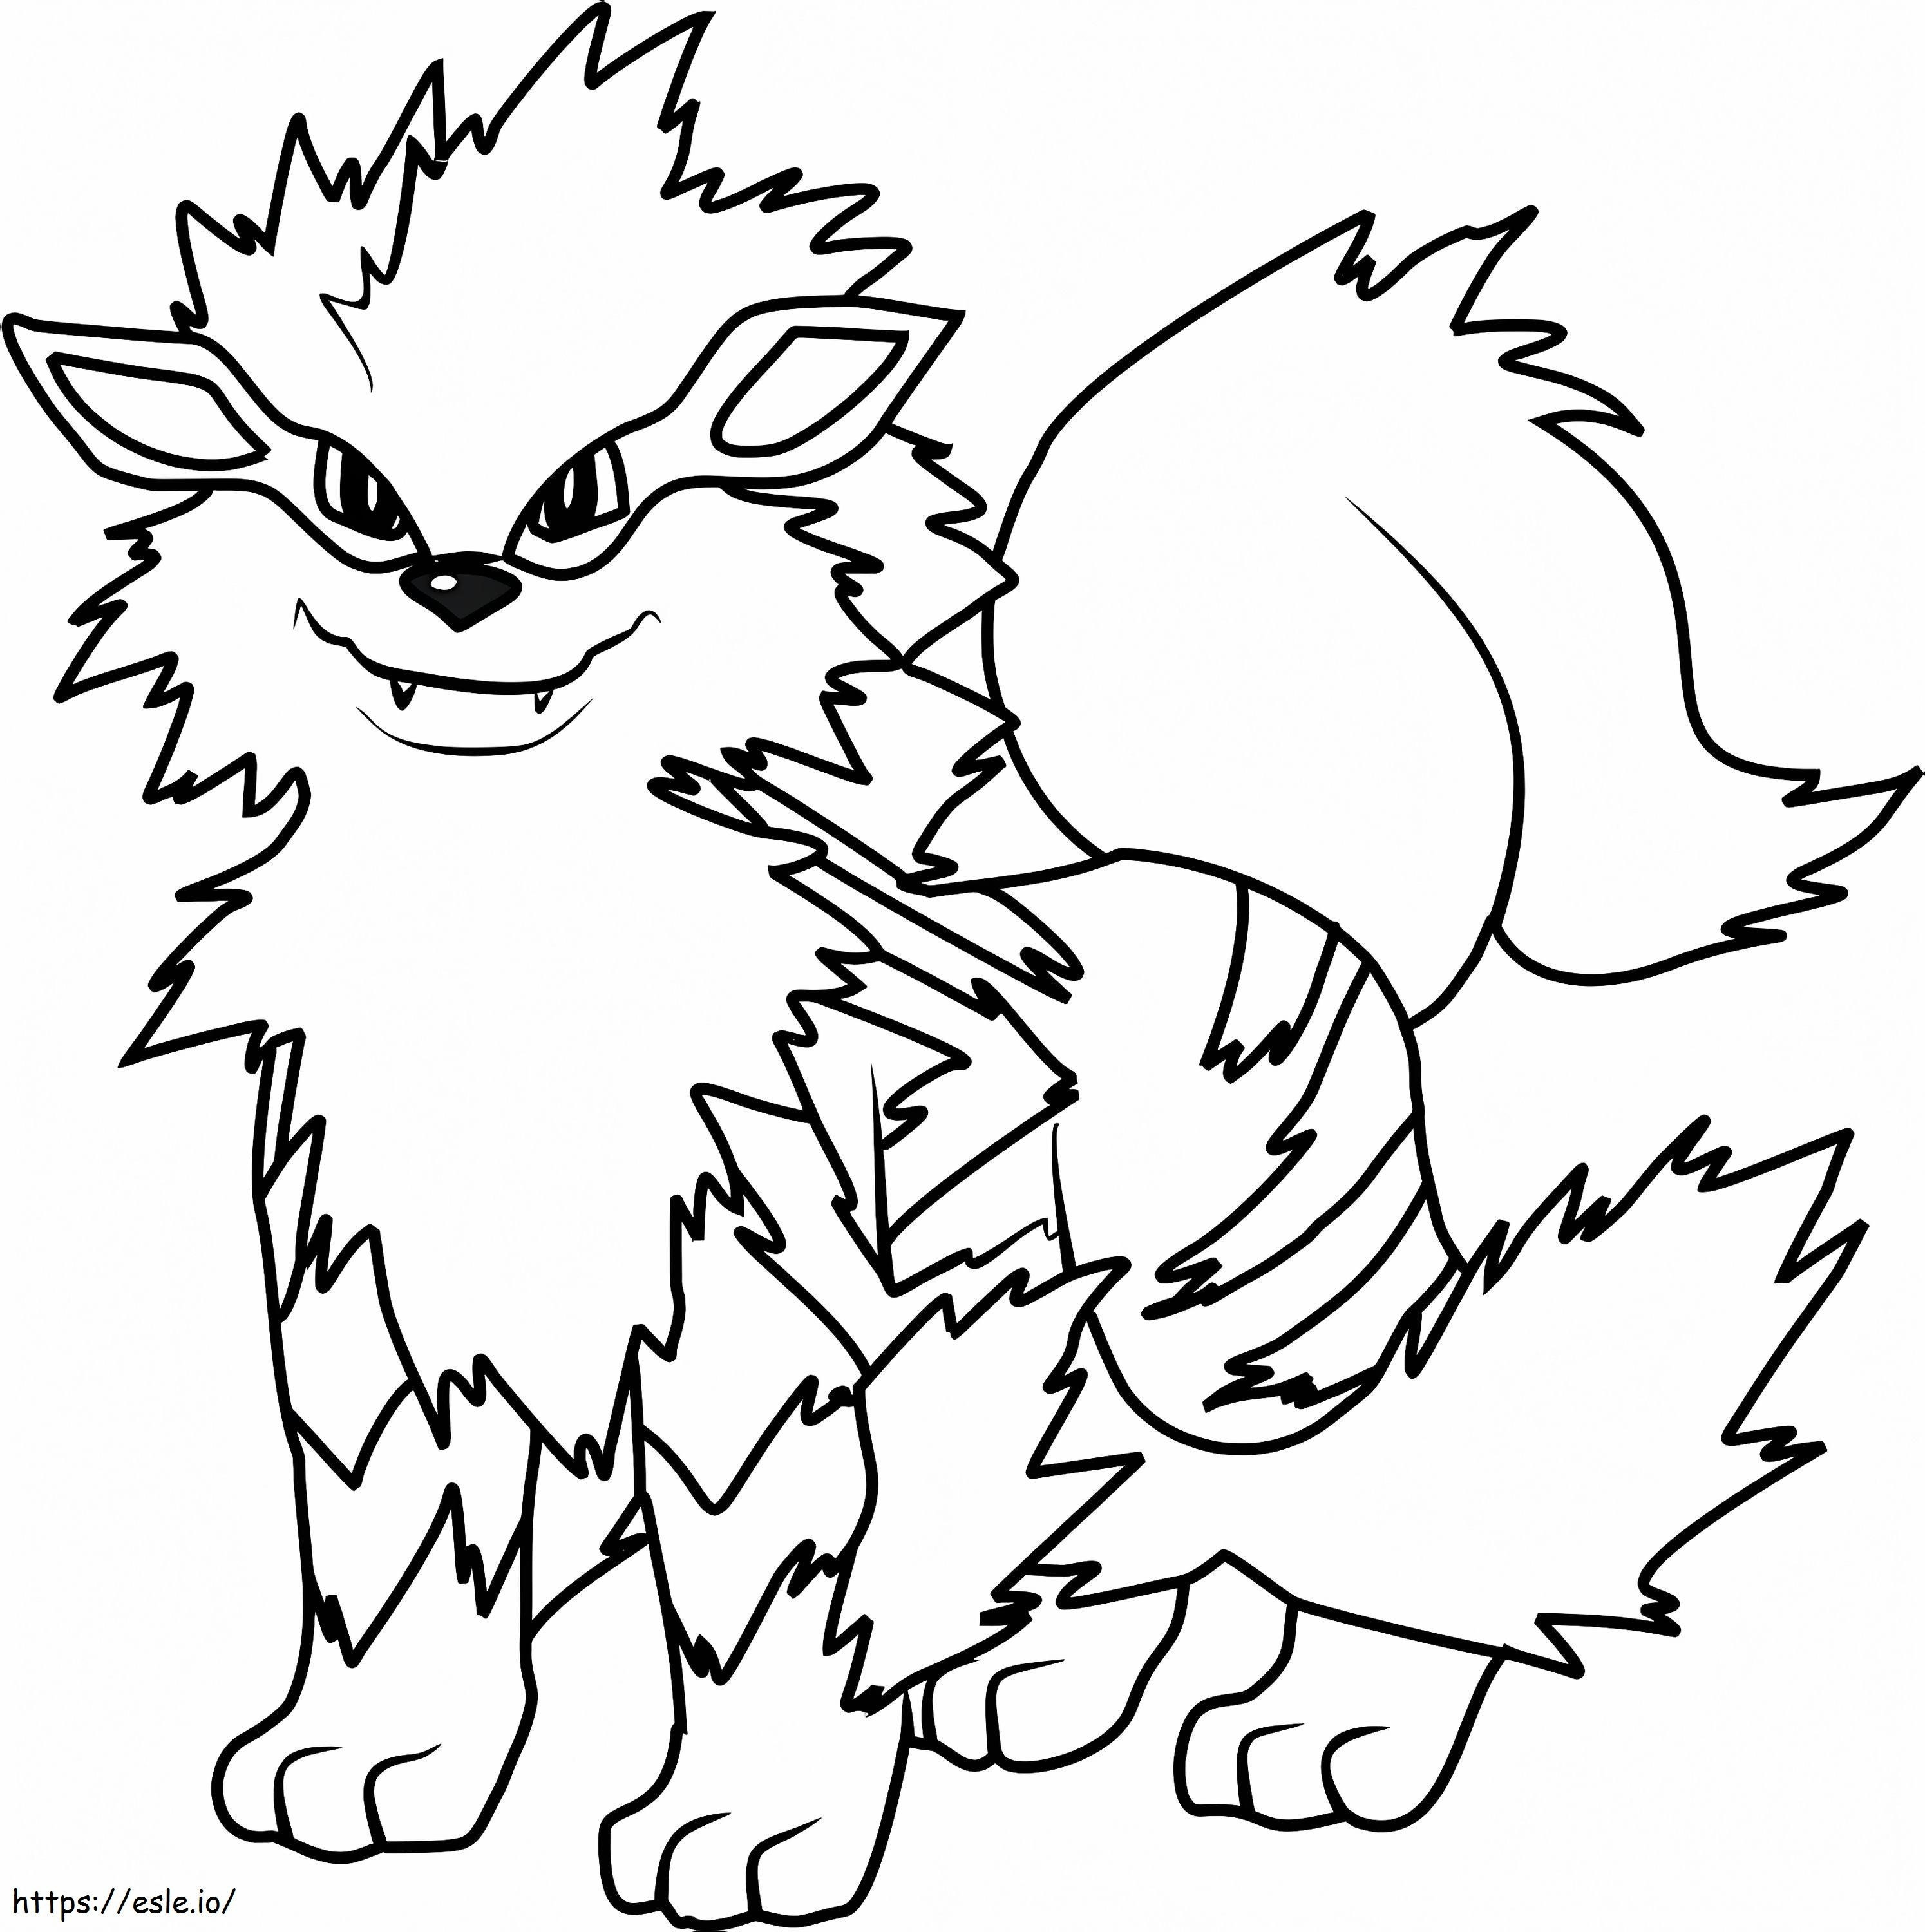 Arcanine In Pokemon coloring page